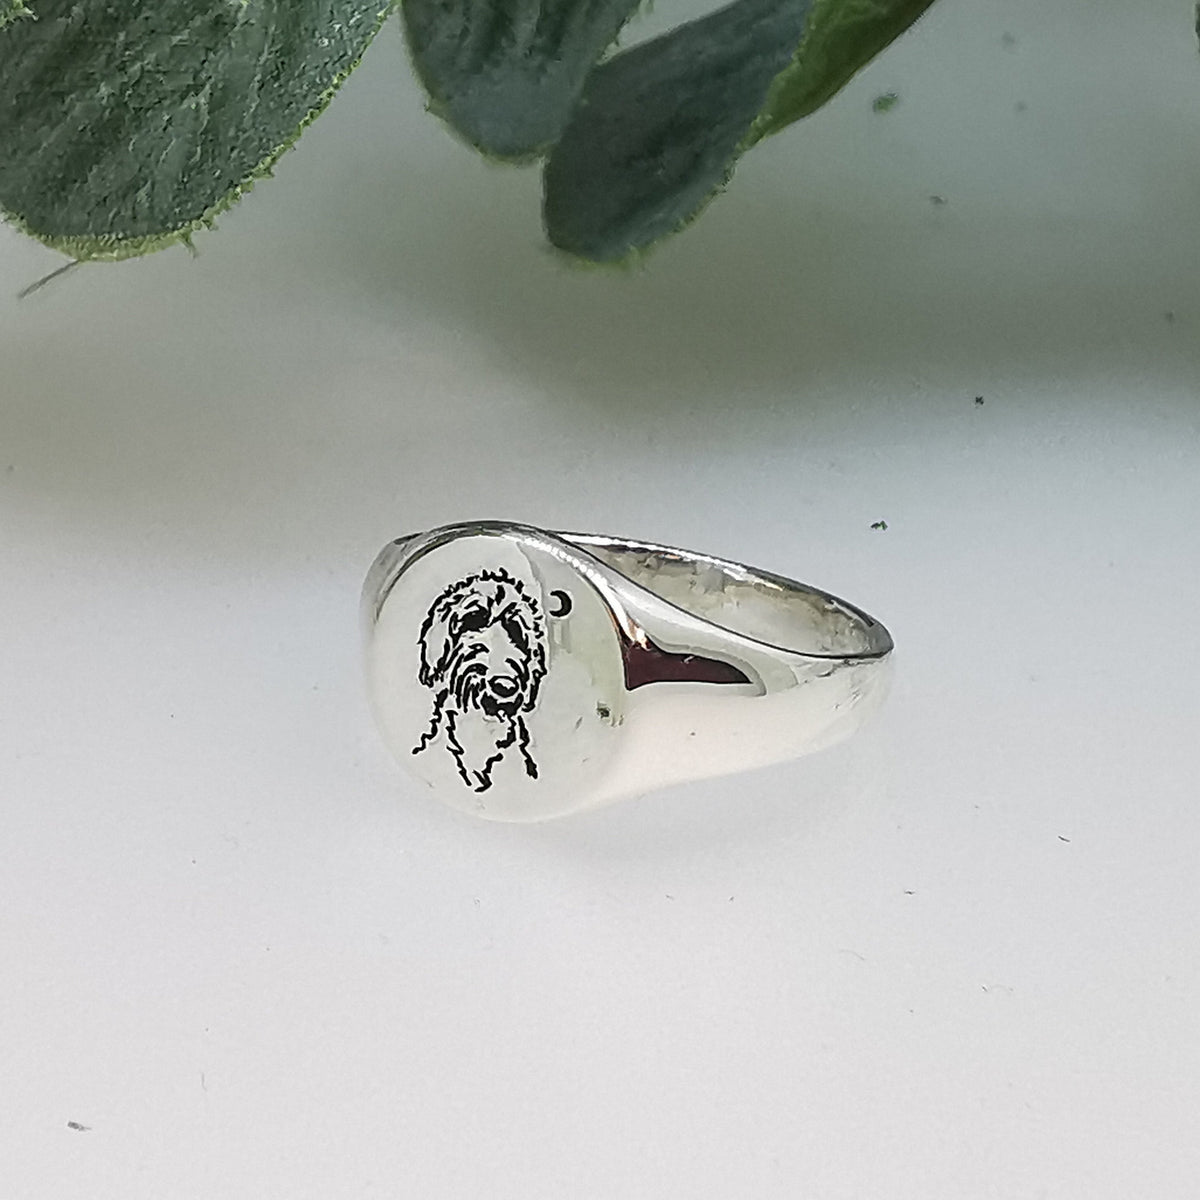 custom engraved signet ring from drawing sketch of dog portrait